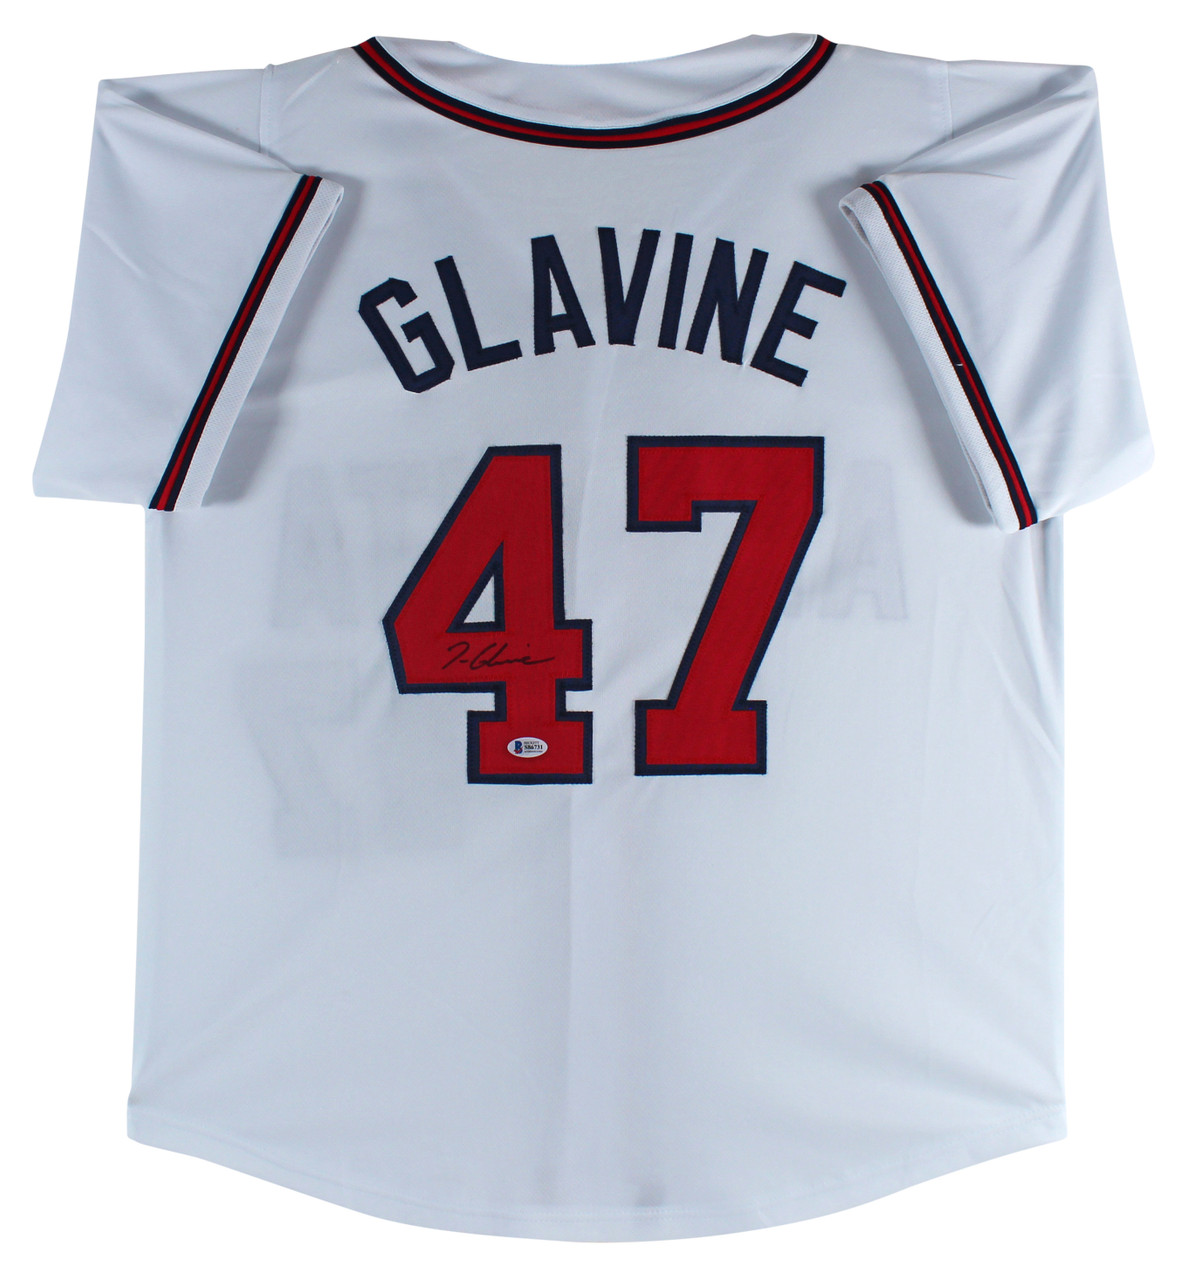 Tom Glavine Authentic Signed White Pro Style Framed Jersey